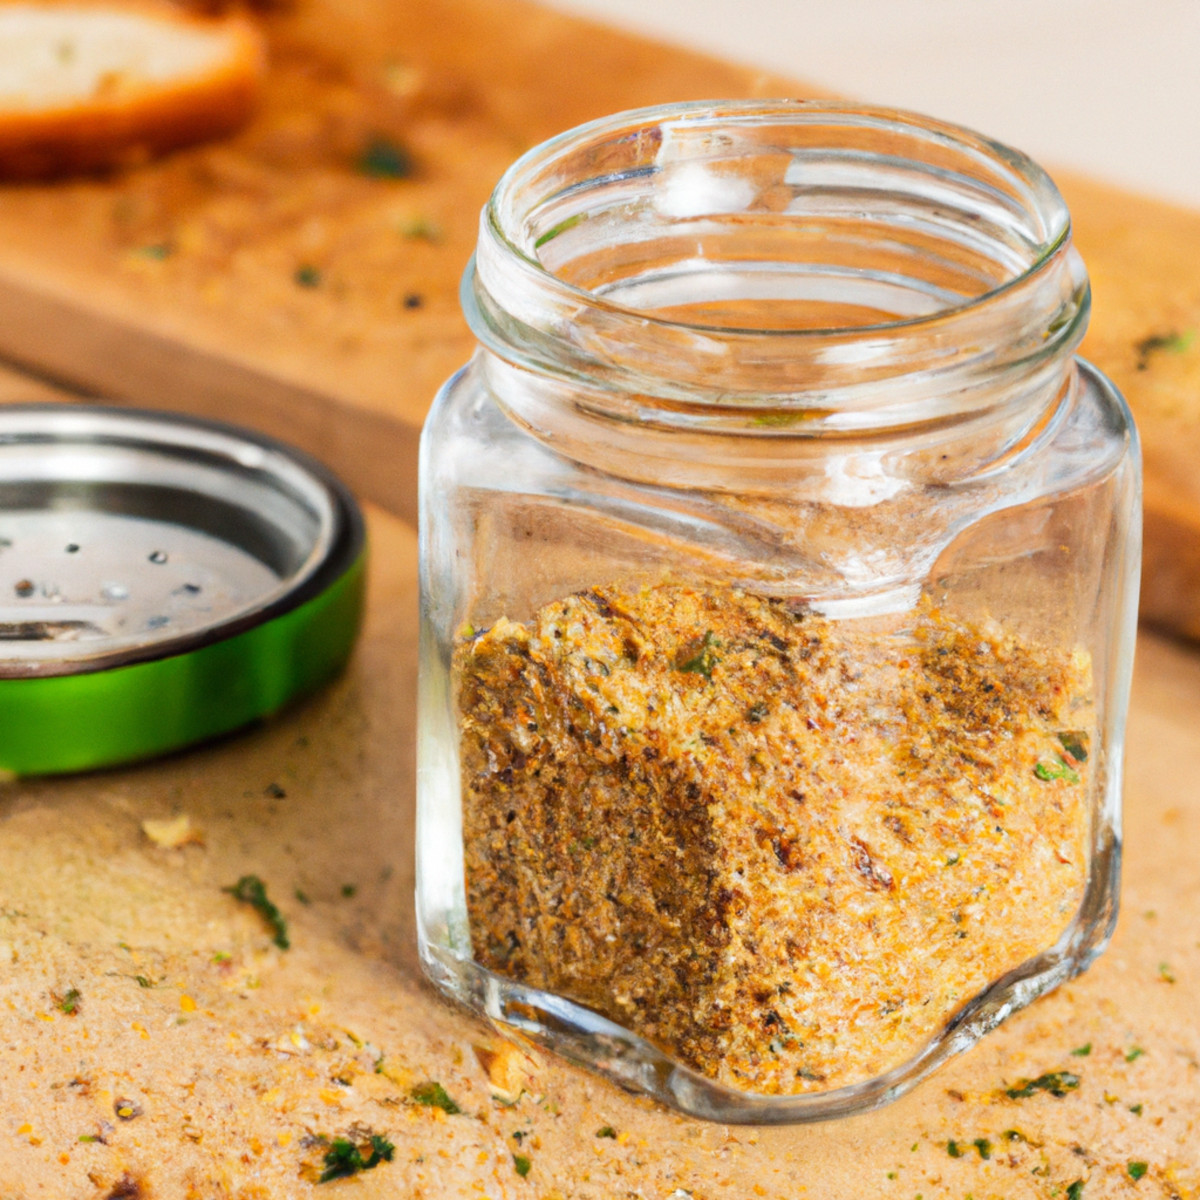 breadcrumbs with basil and parsley